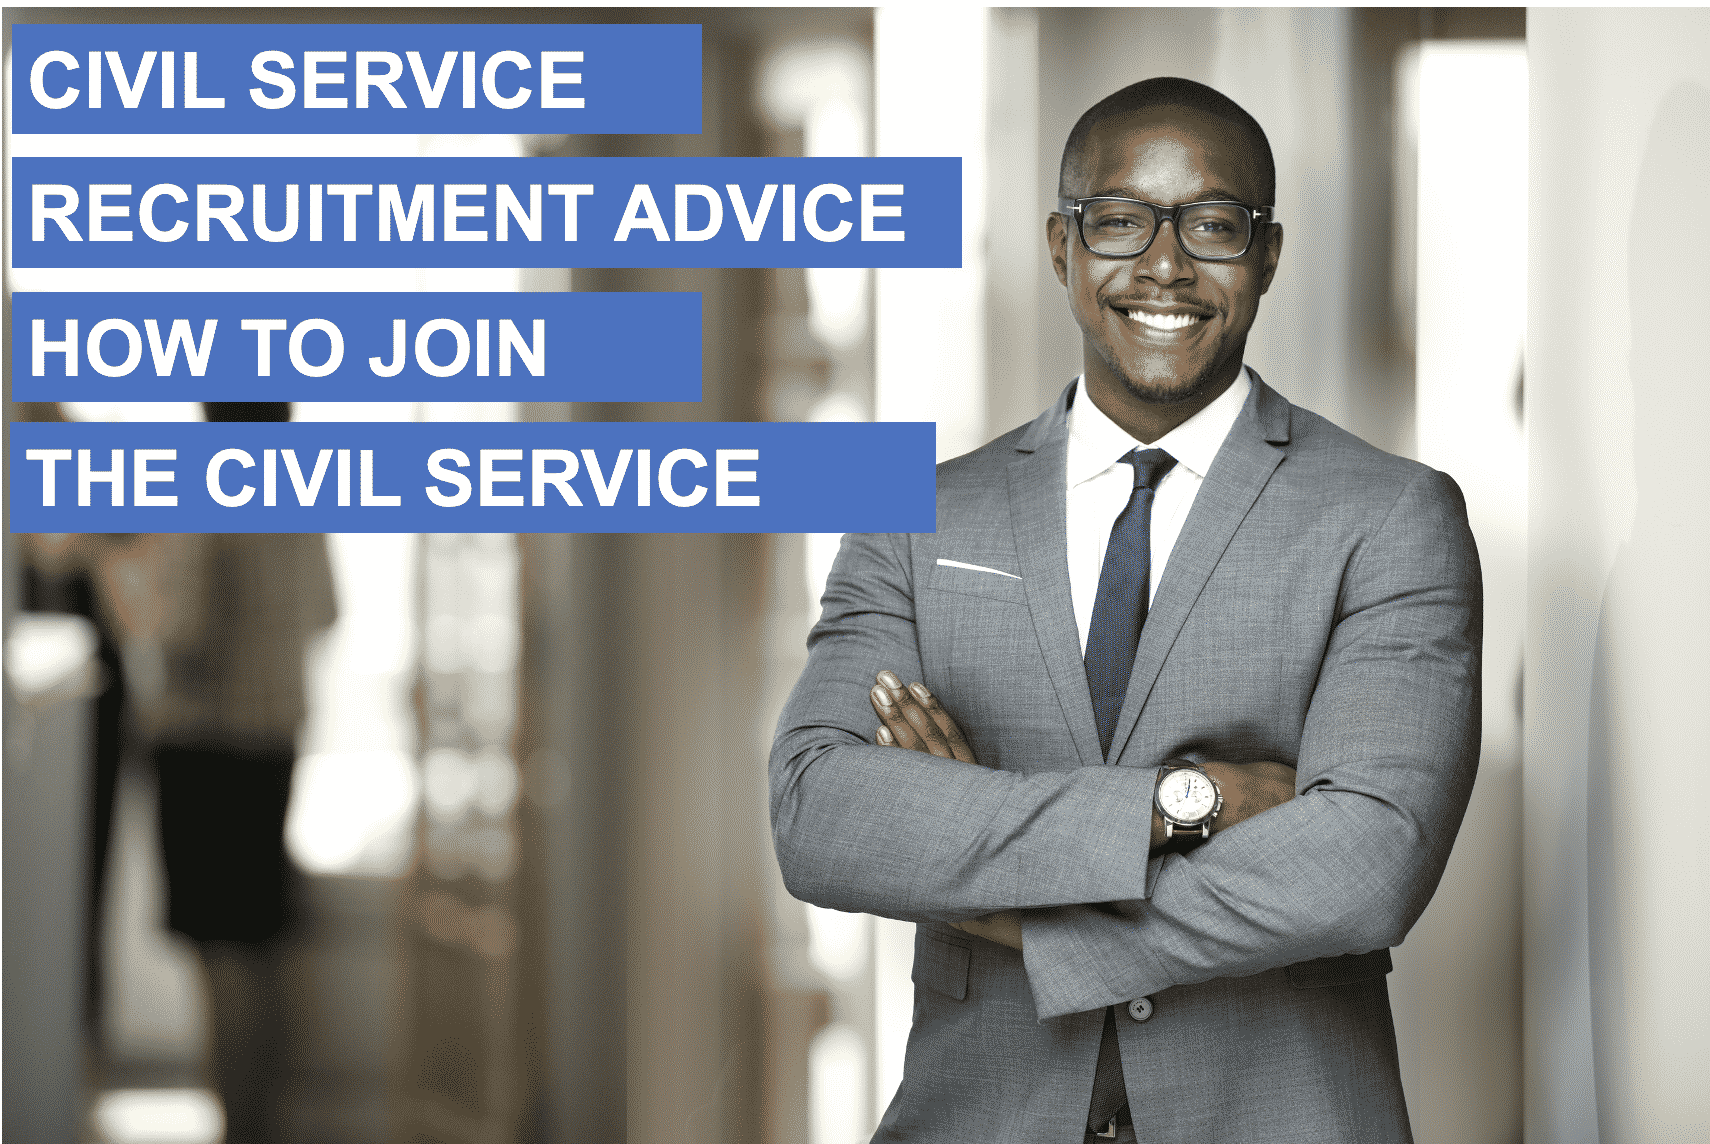 How to Join the Civil Service Careers advice from